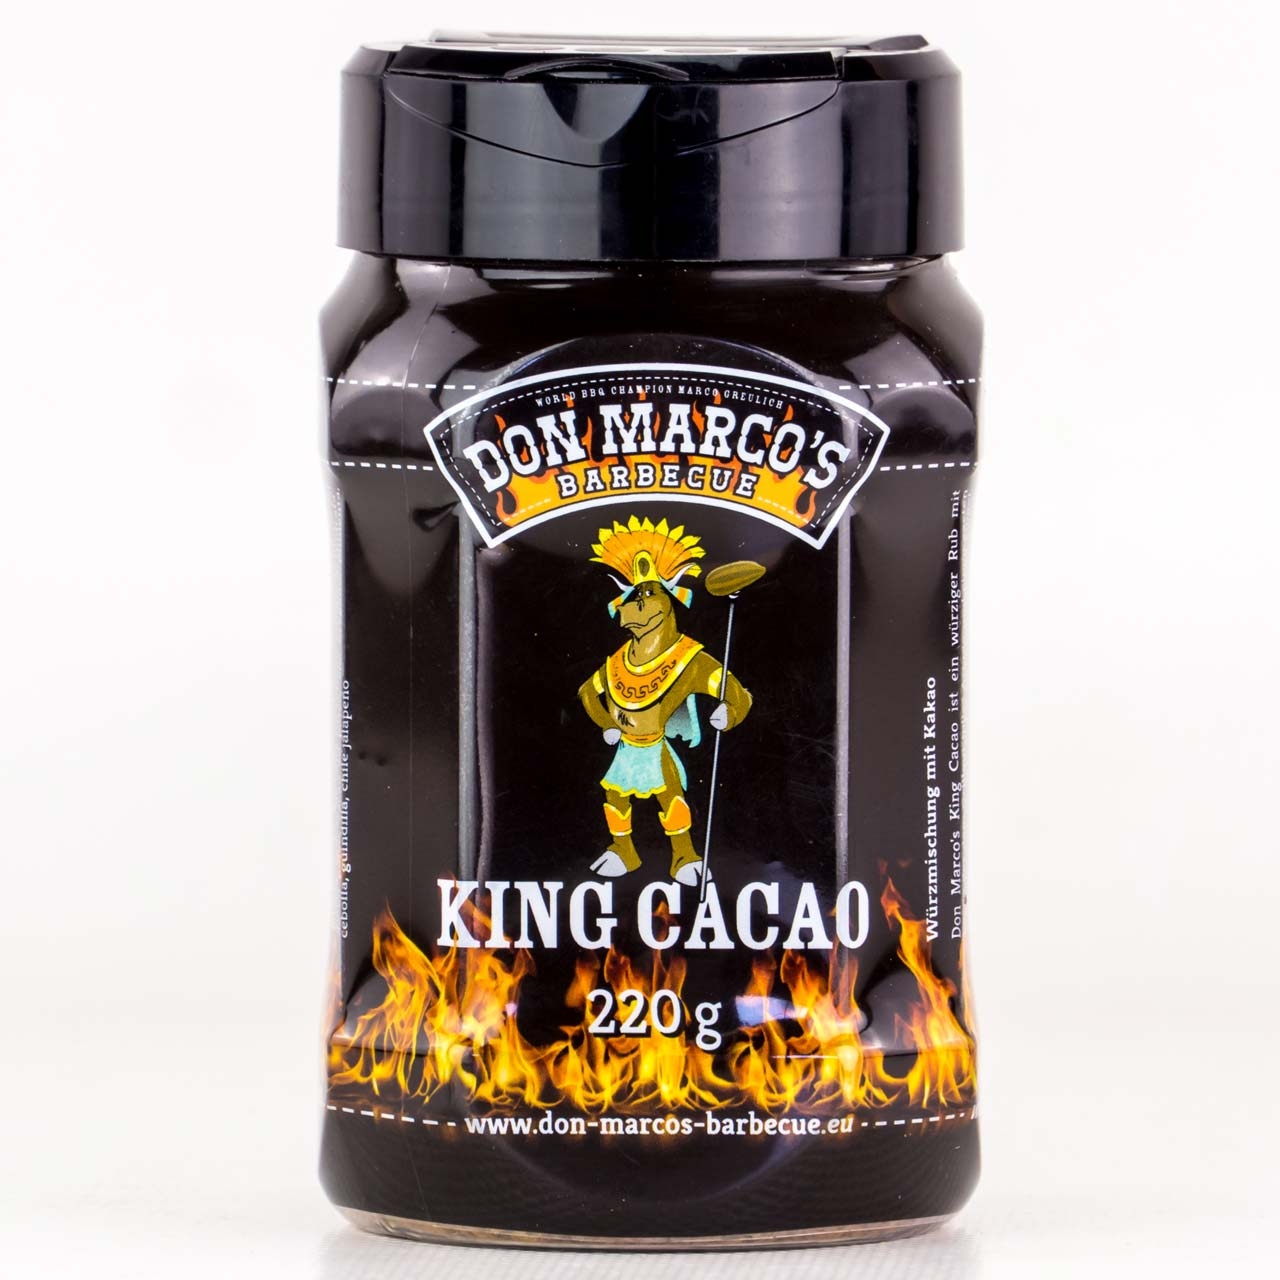 Don Marco's - King Cacao Rub, 220 g Streuer